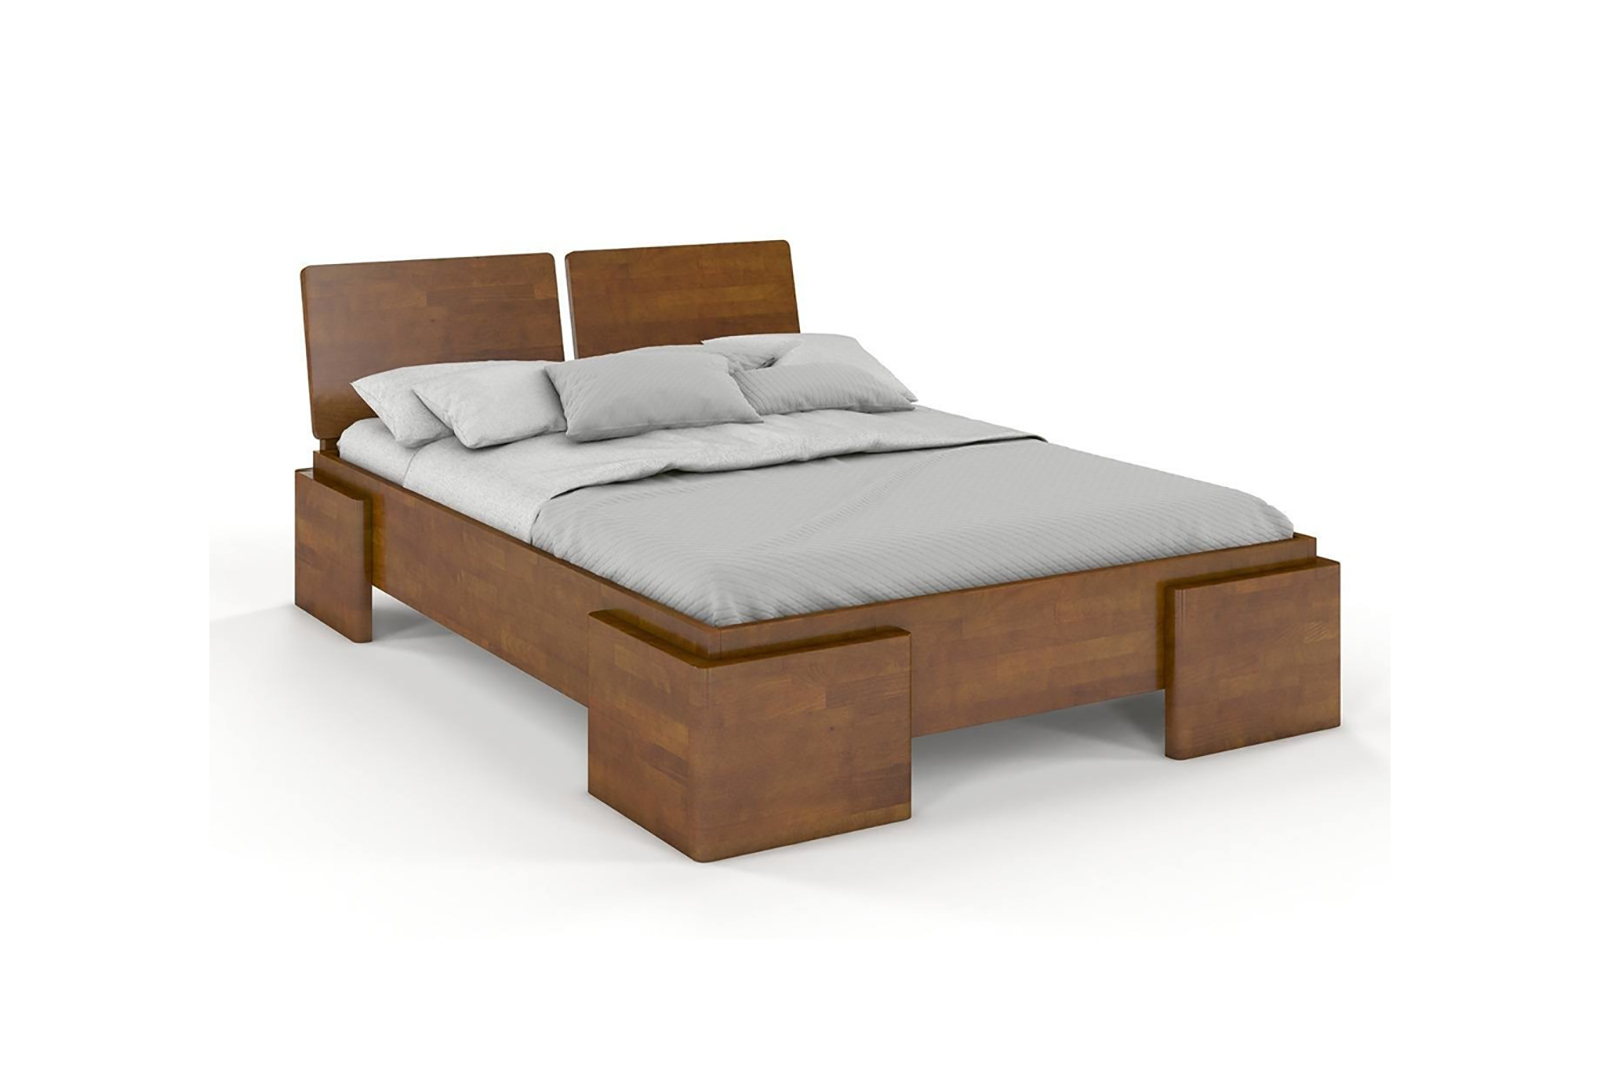 VISBY ARGENTO HIGH BEECH BED 1